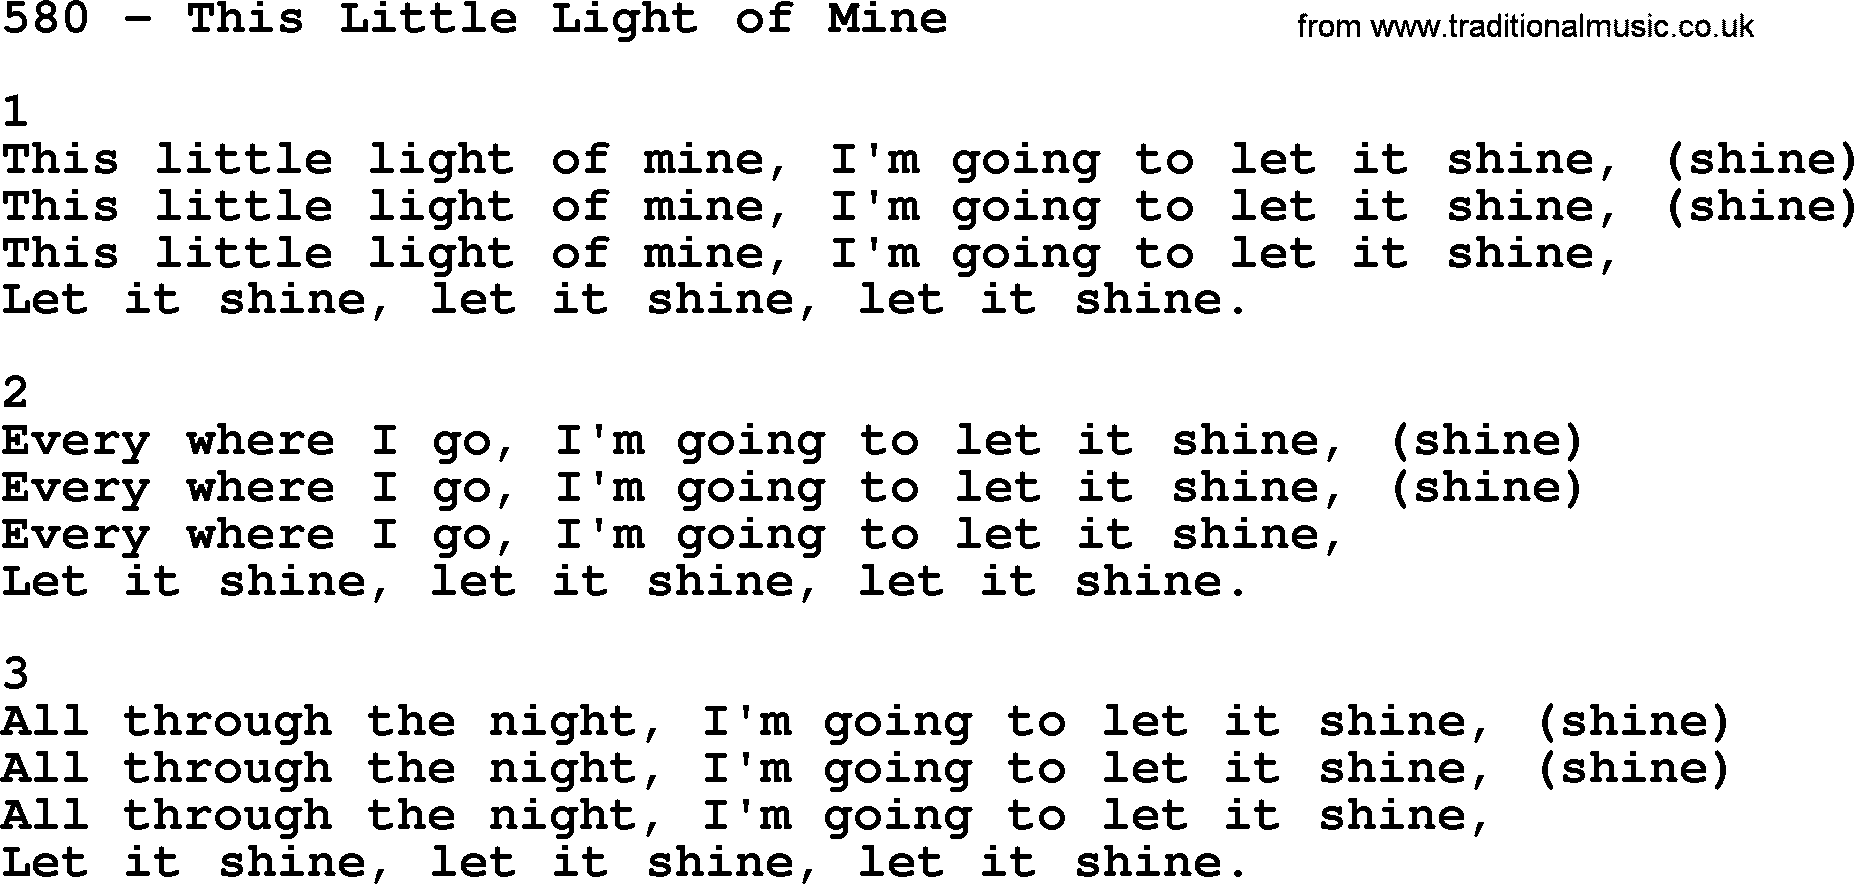 Complete Adventis Hymnal, title: 580-This Little Light Of Mine, with lyrics, midi, mp3, powerpoints(PPT) and PDF,